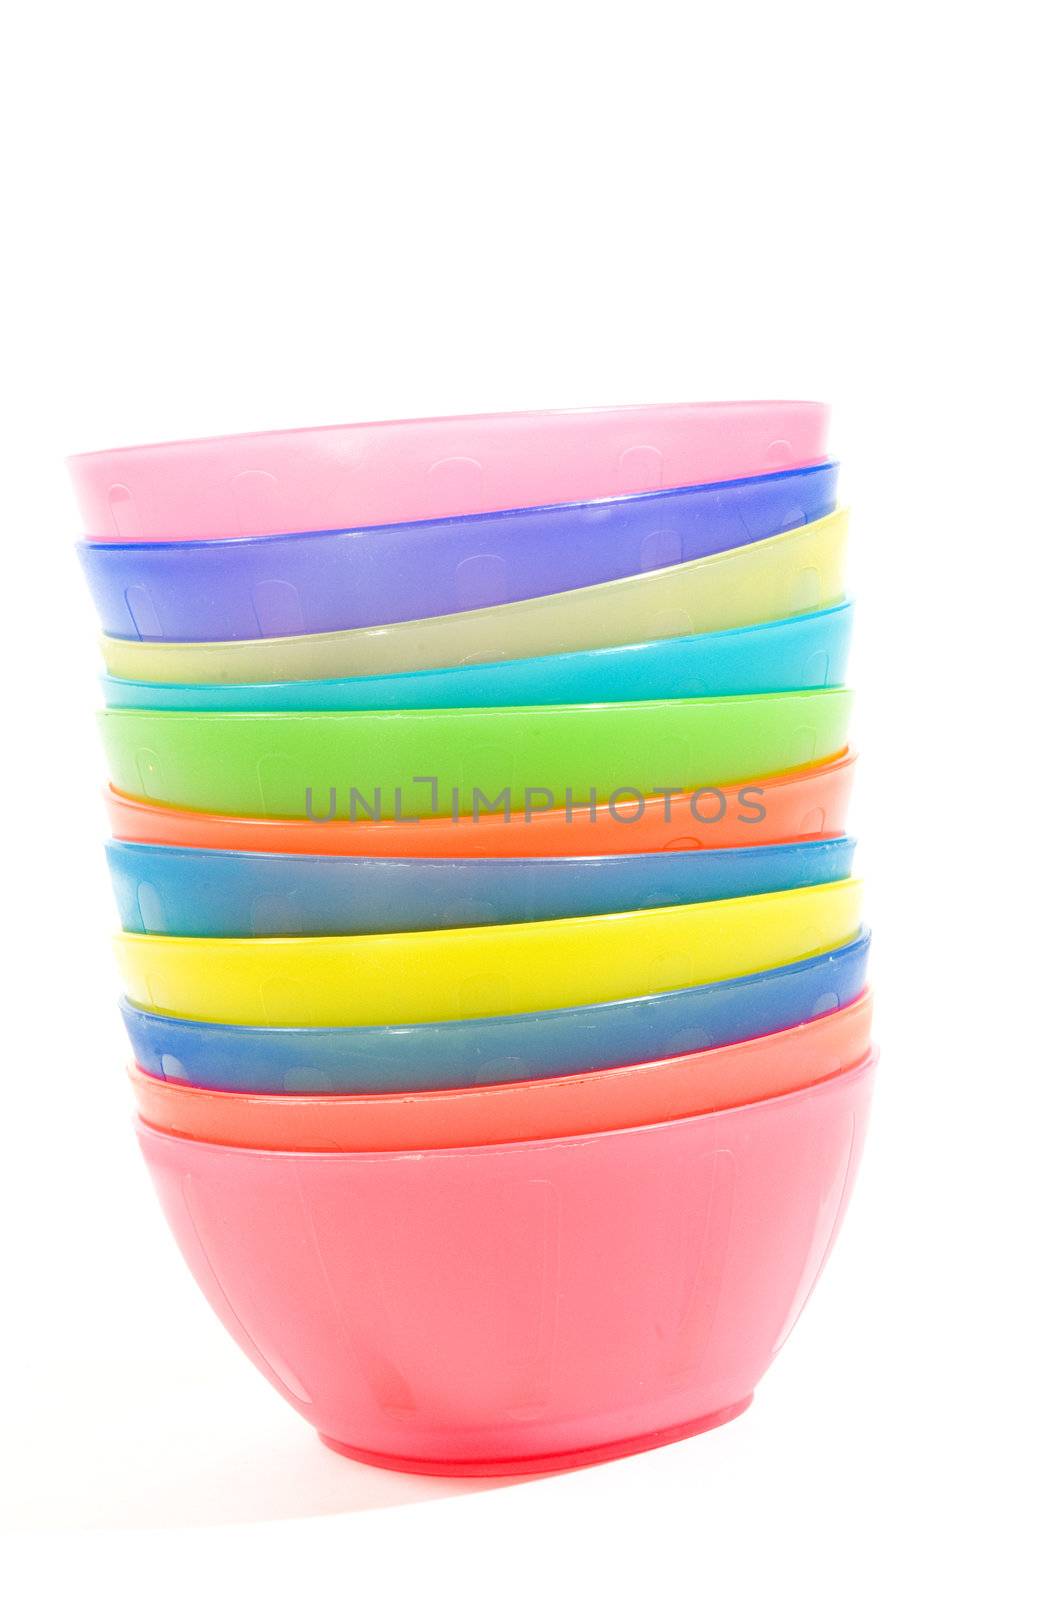 Stack of colorful plastic bowls over white background by ladyminnie